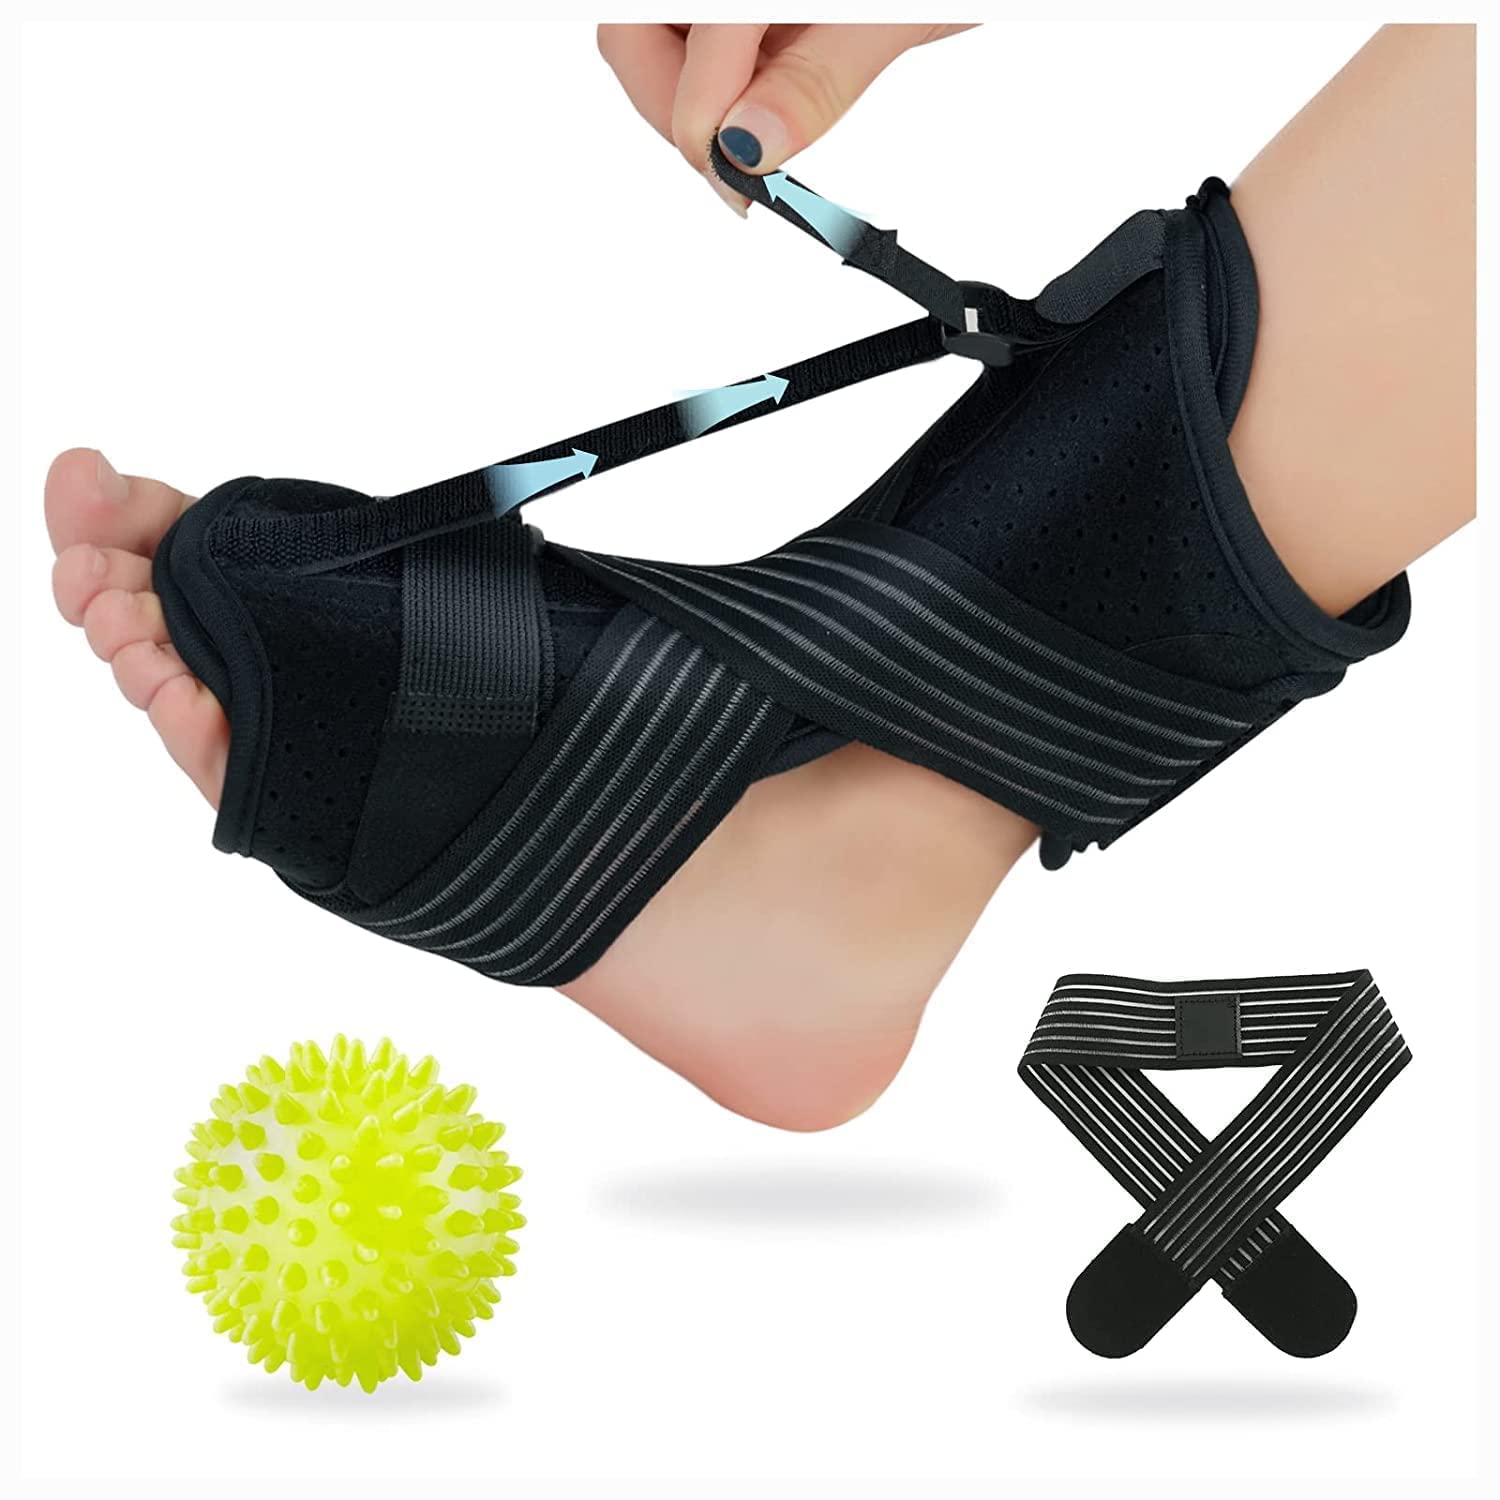 Plantar Fasciitis Night Splint, Foot Drop Orthotic Brace Support Adjustable  Ankle Brace With Spiky Massage Ball For Effective Relief From Plantar Fasc